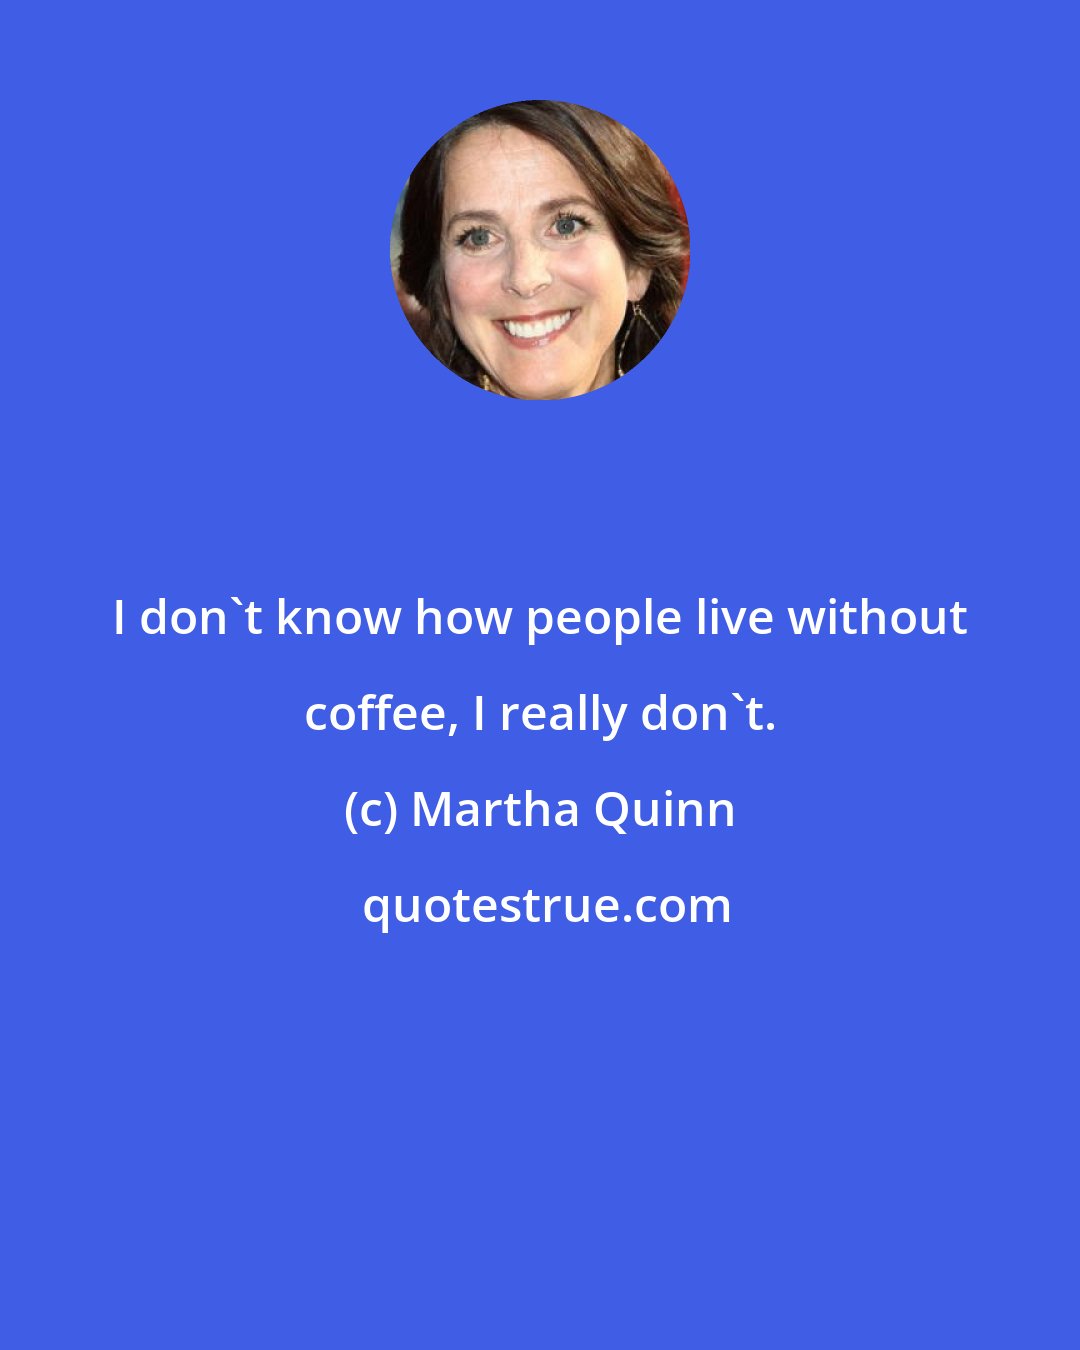 Martha Quinn: I don't know how people live without coffee, I really don't.